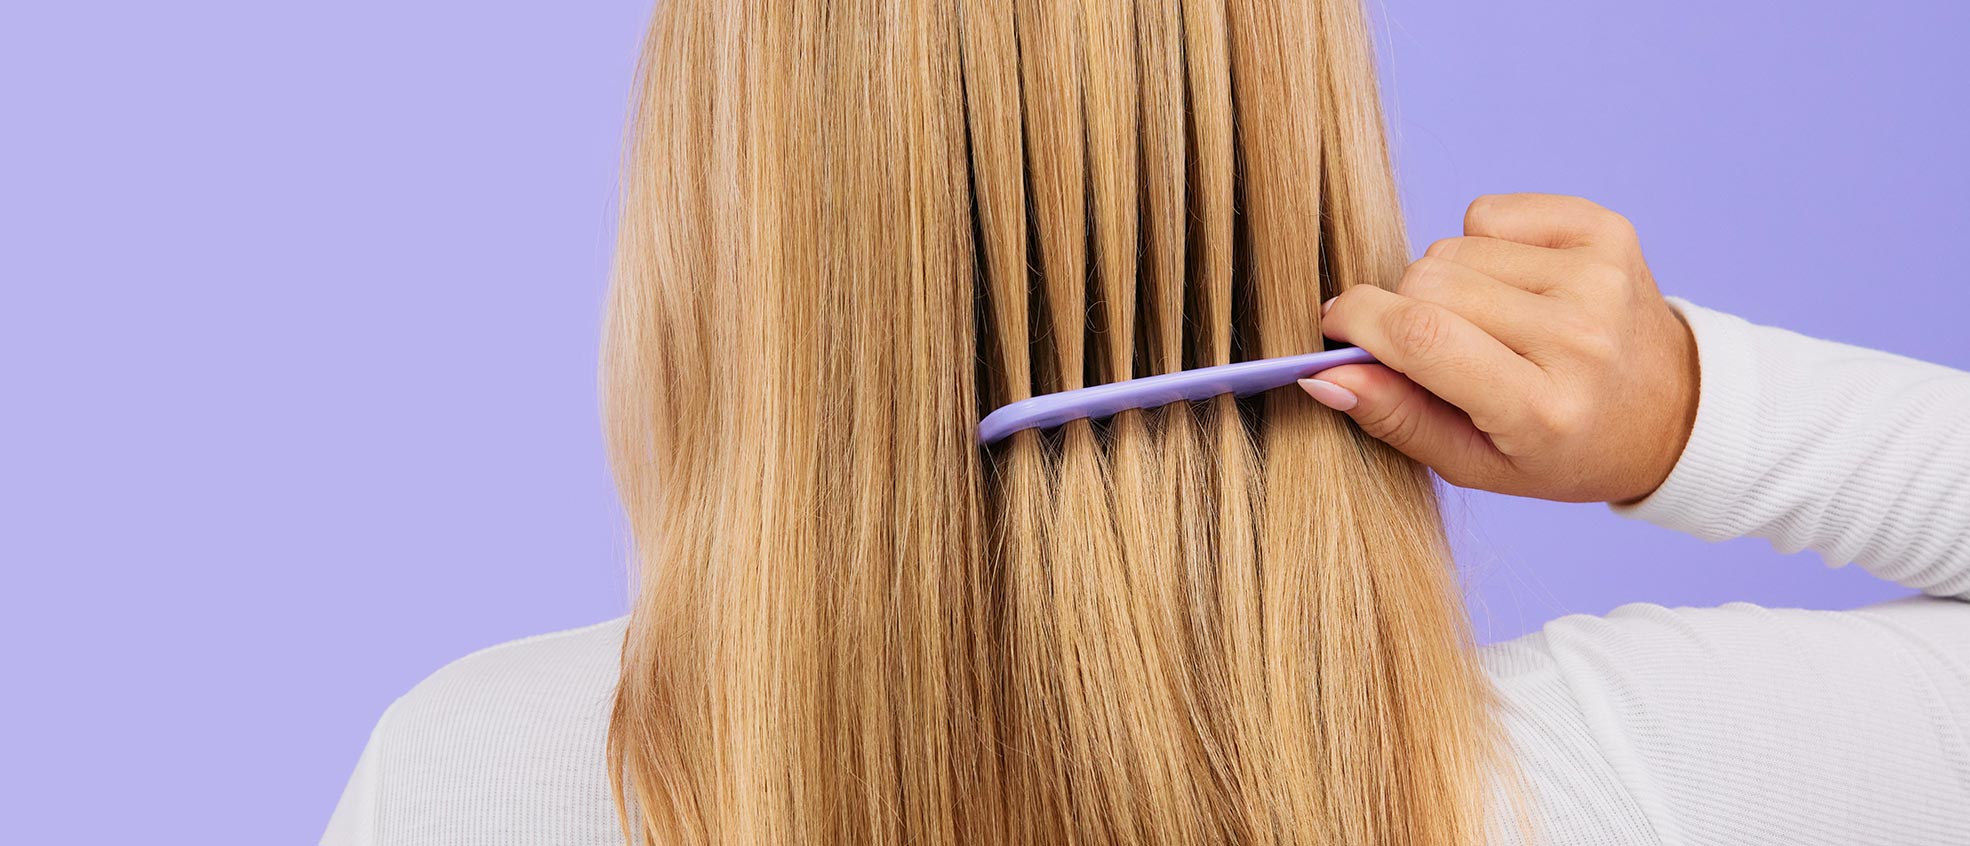 A blond woman’s healthy hair being effortlessly combed with her right hand. Subject poses in front of a lavender color background.